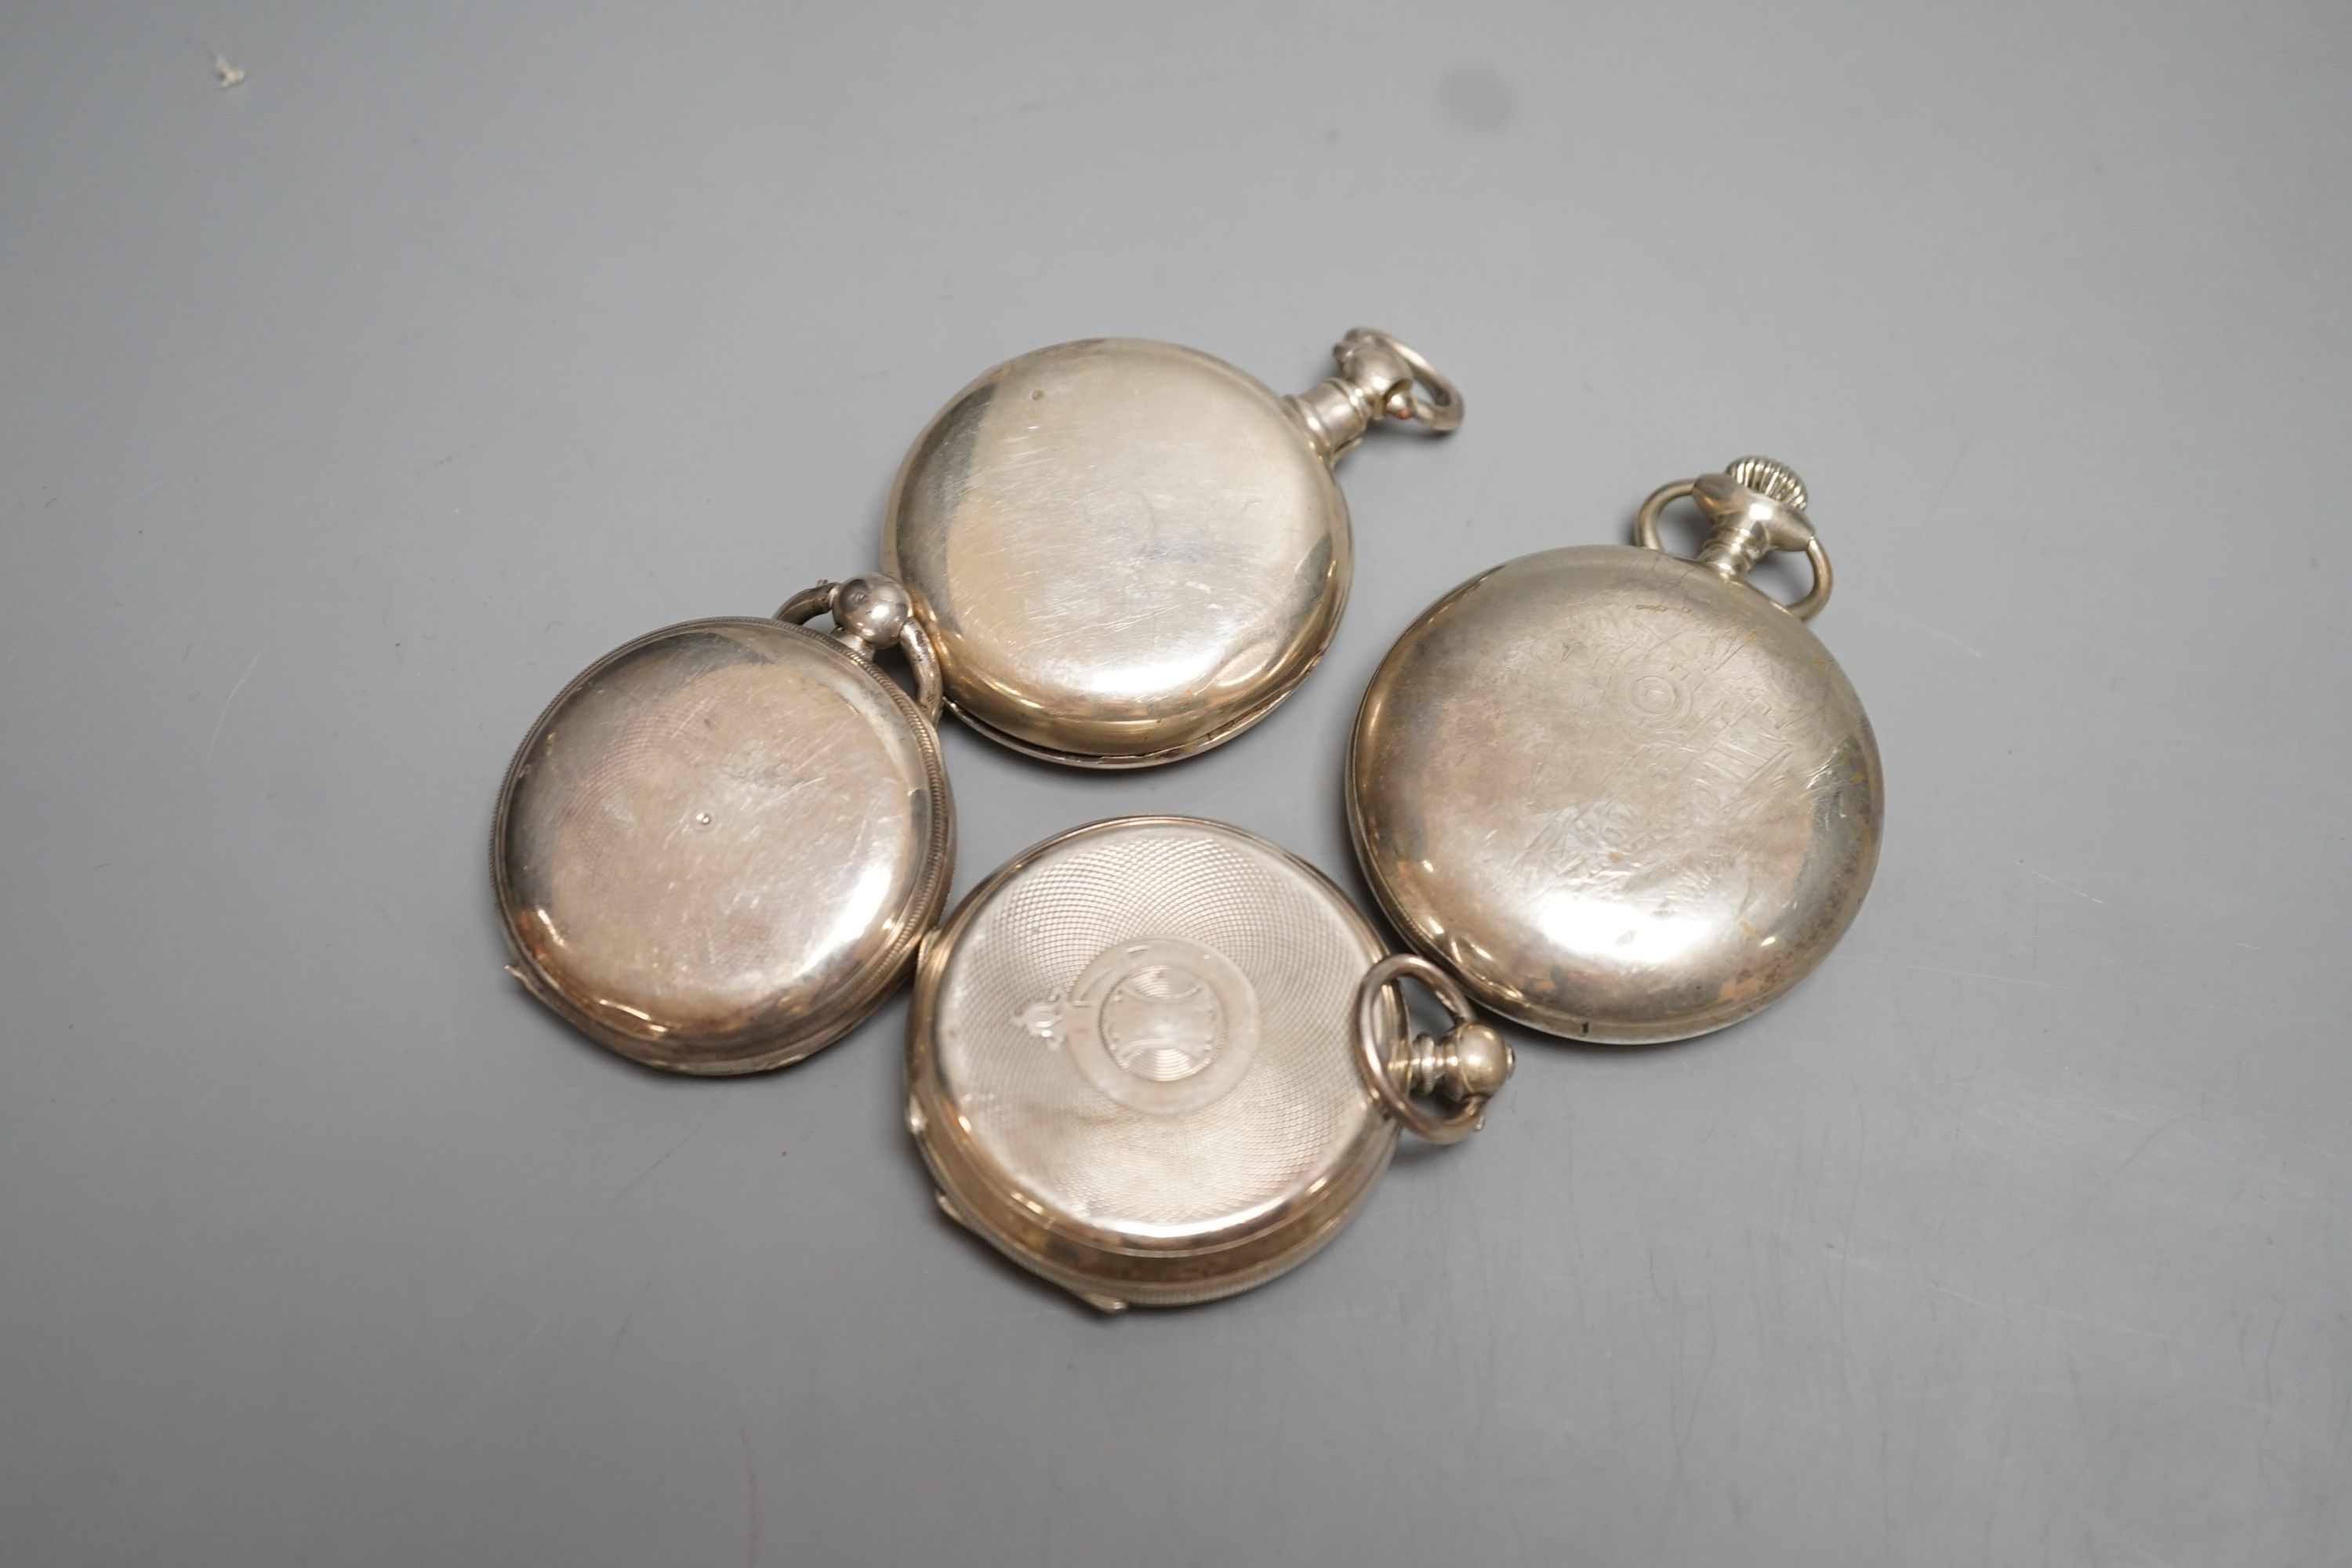 Two silver open face pocket watches including Henry Peck, London and two other pocket watches including Elgin.